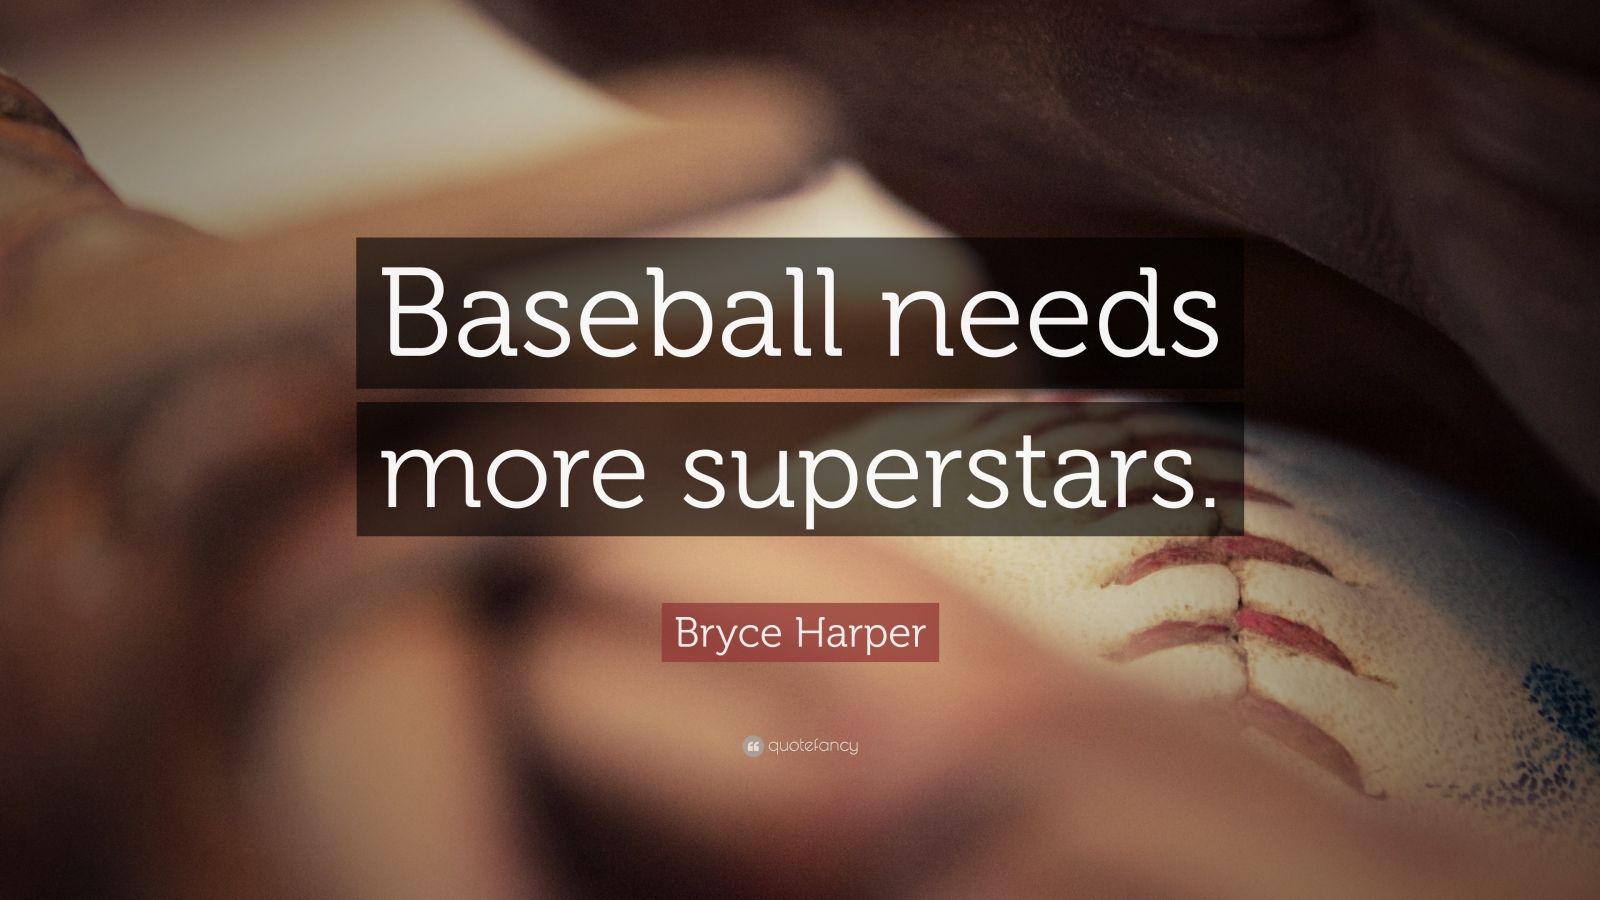 Top 15 Bryce Harper Quotes | 2021 Edition | Free Images - QuoteFancy